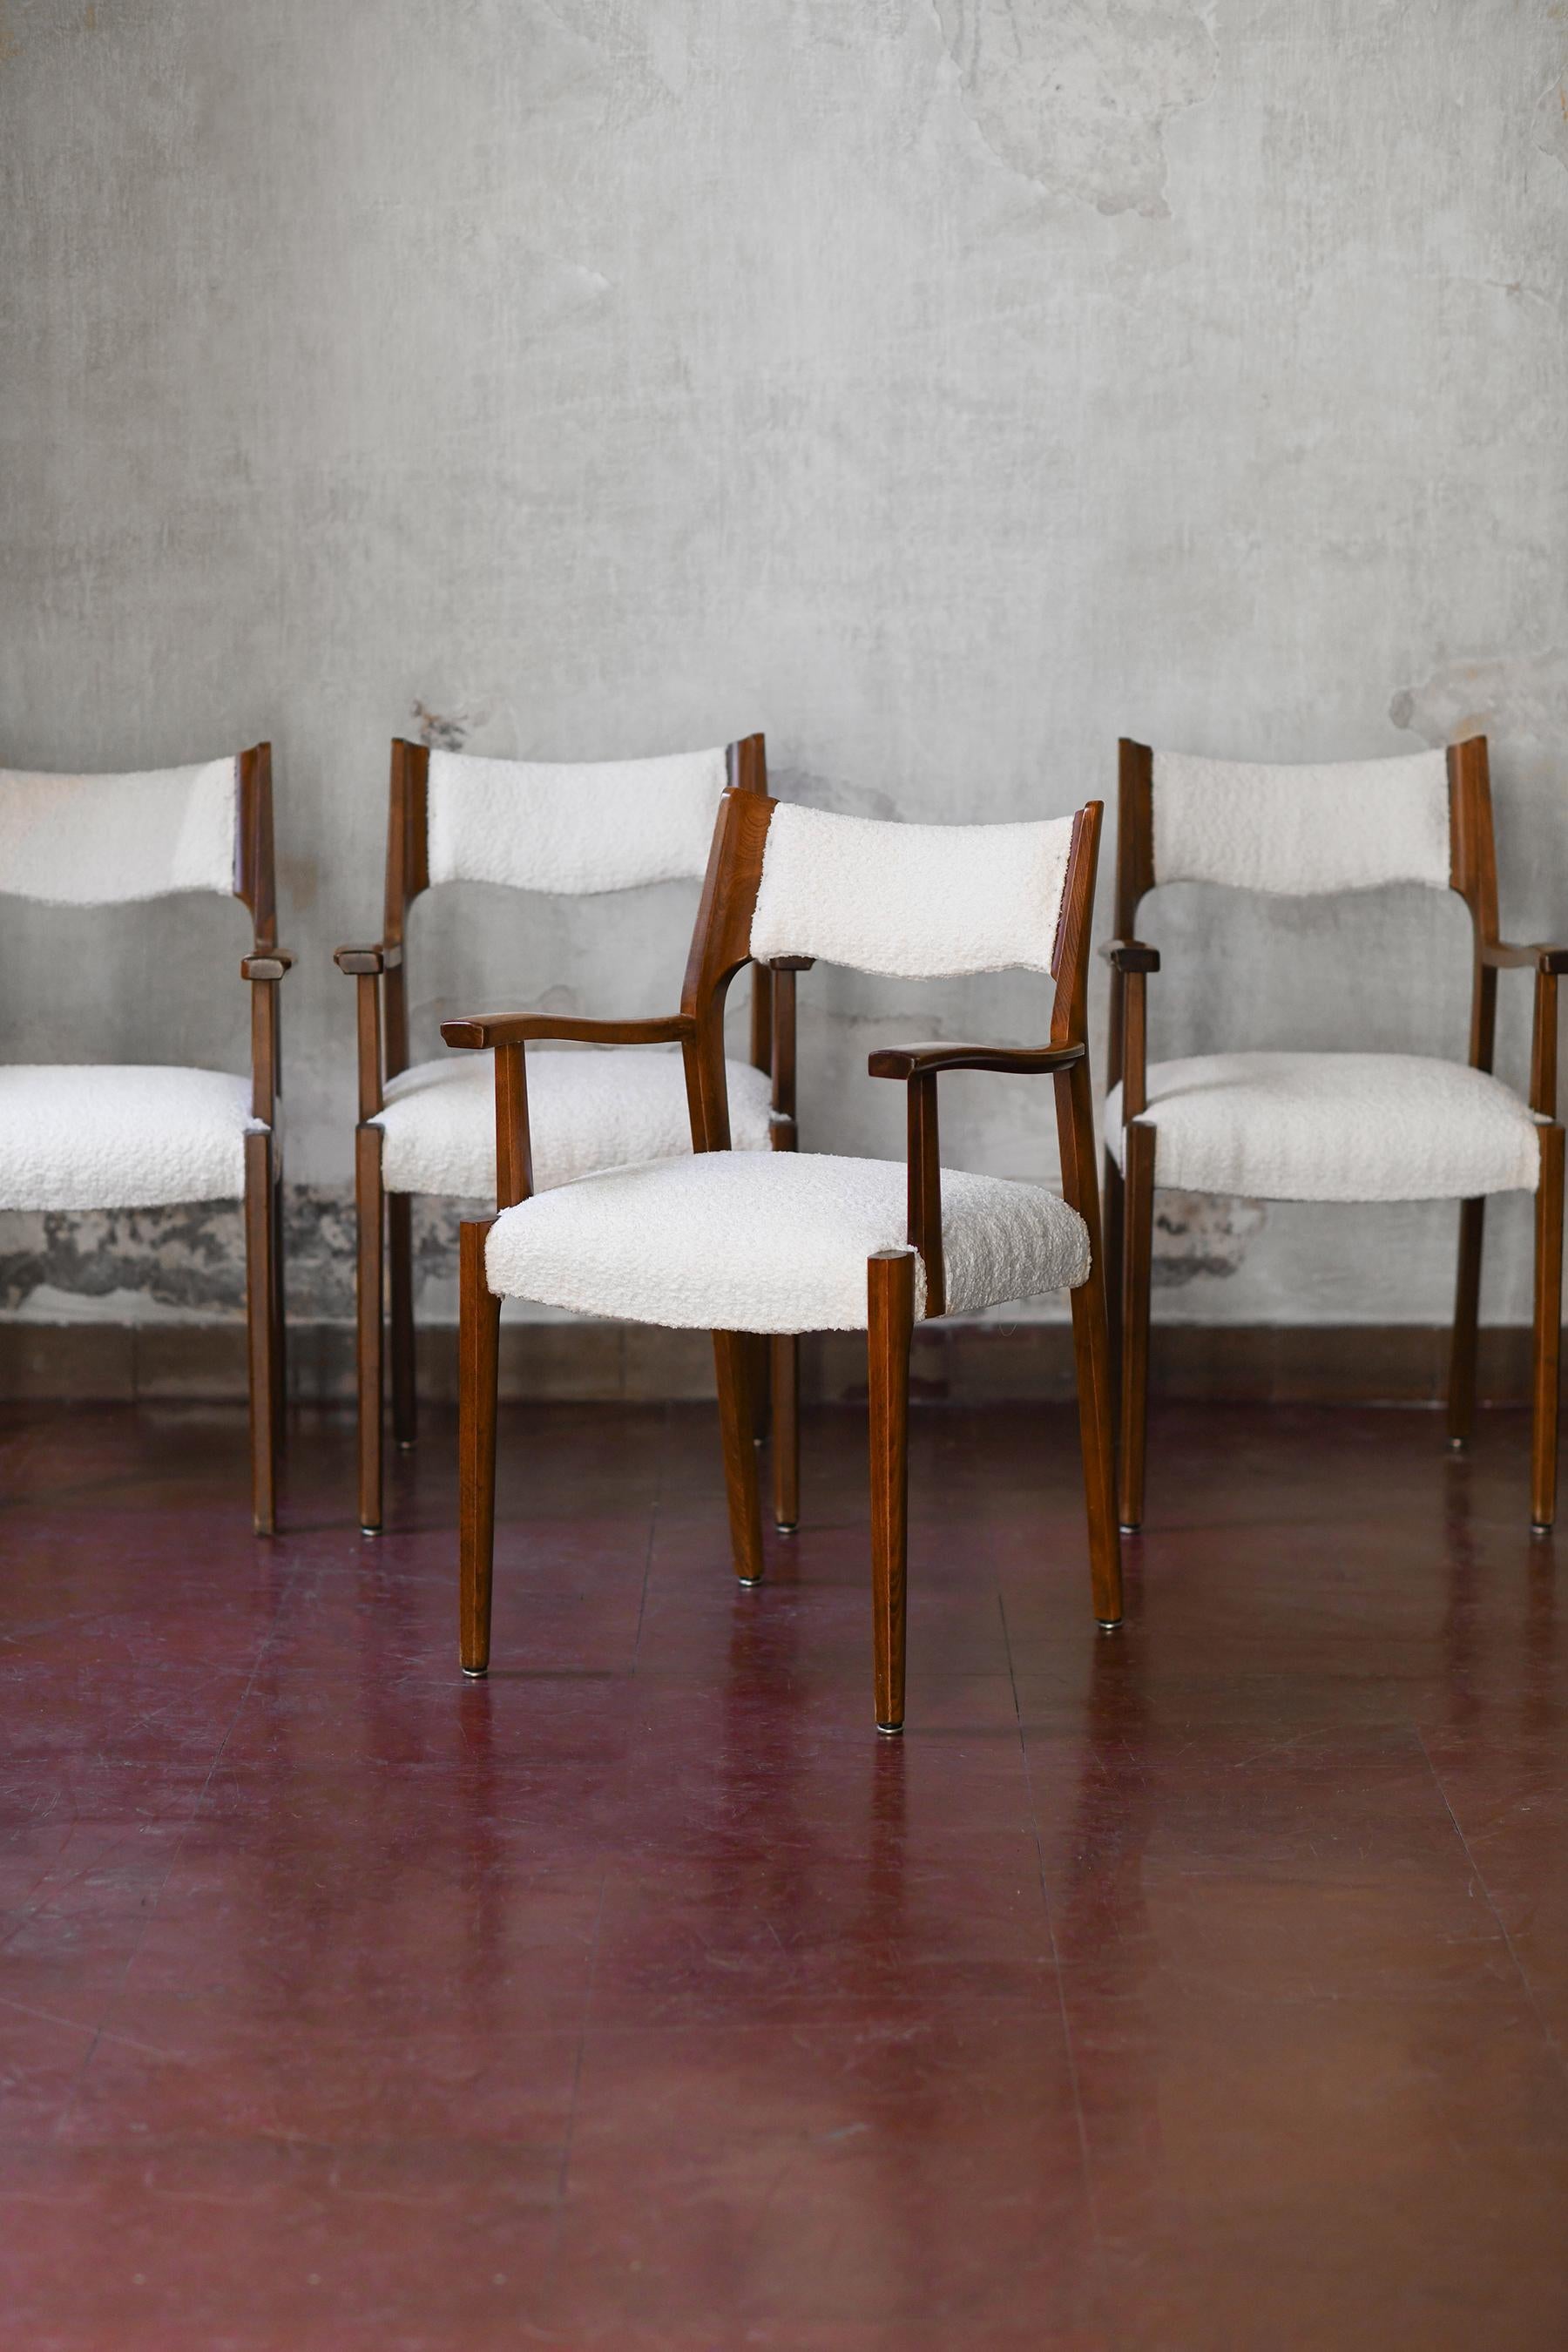 Set of 6 Mid-Century French armchairs.
Product details
Dimensions of the single chair: 52 L x 81 H x 51 D cm